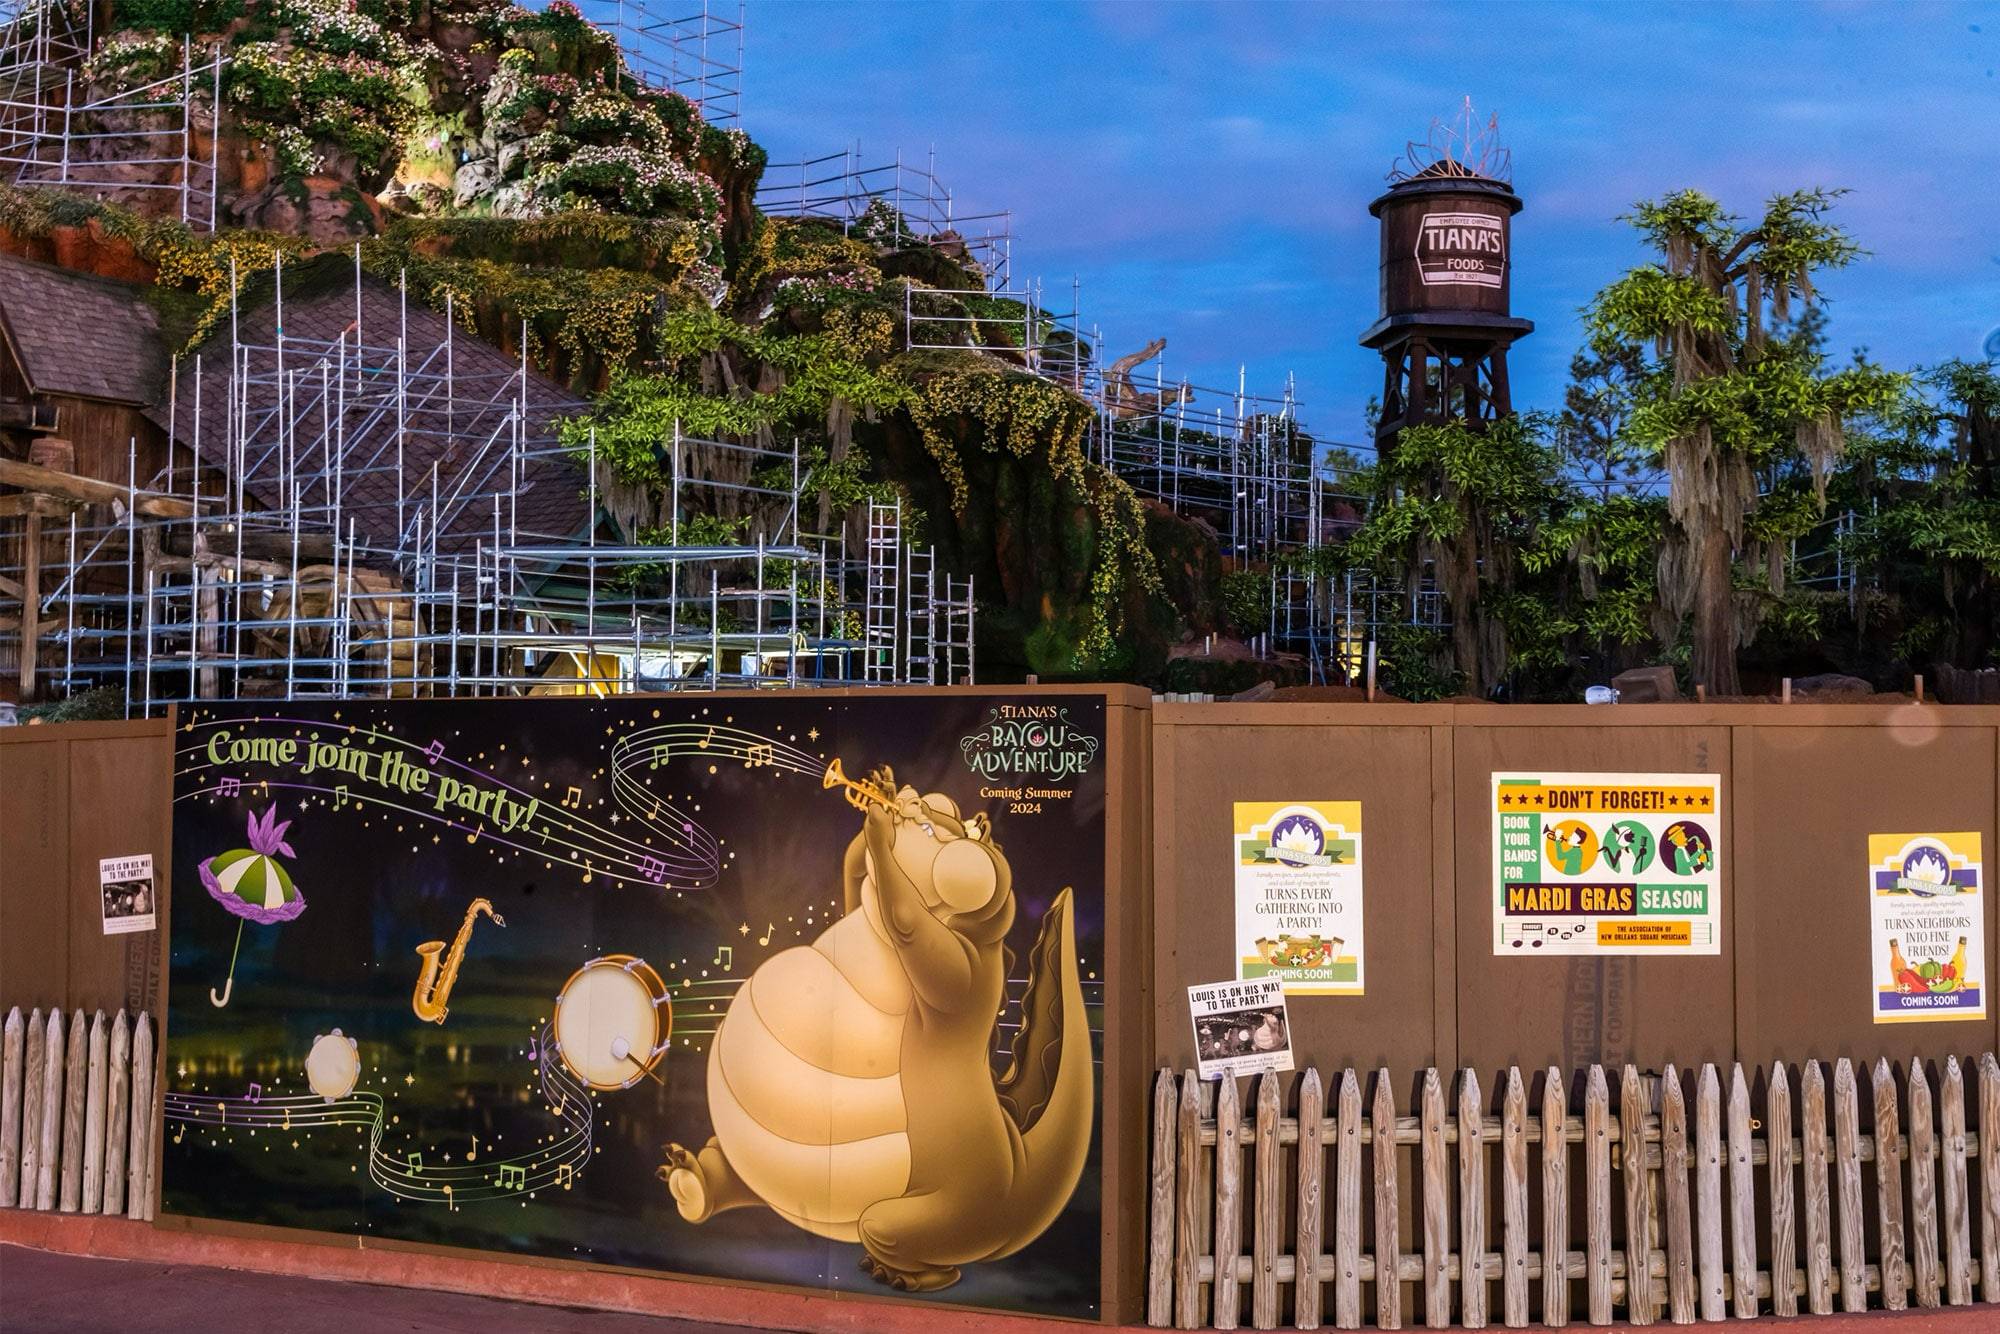 Disney World announces opening date for Tiana's Bayou Adventure